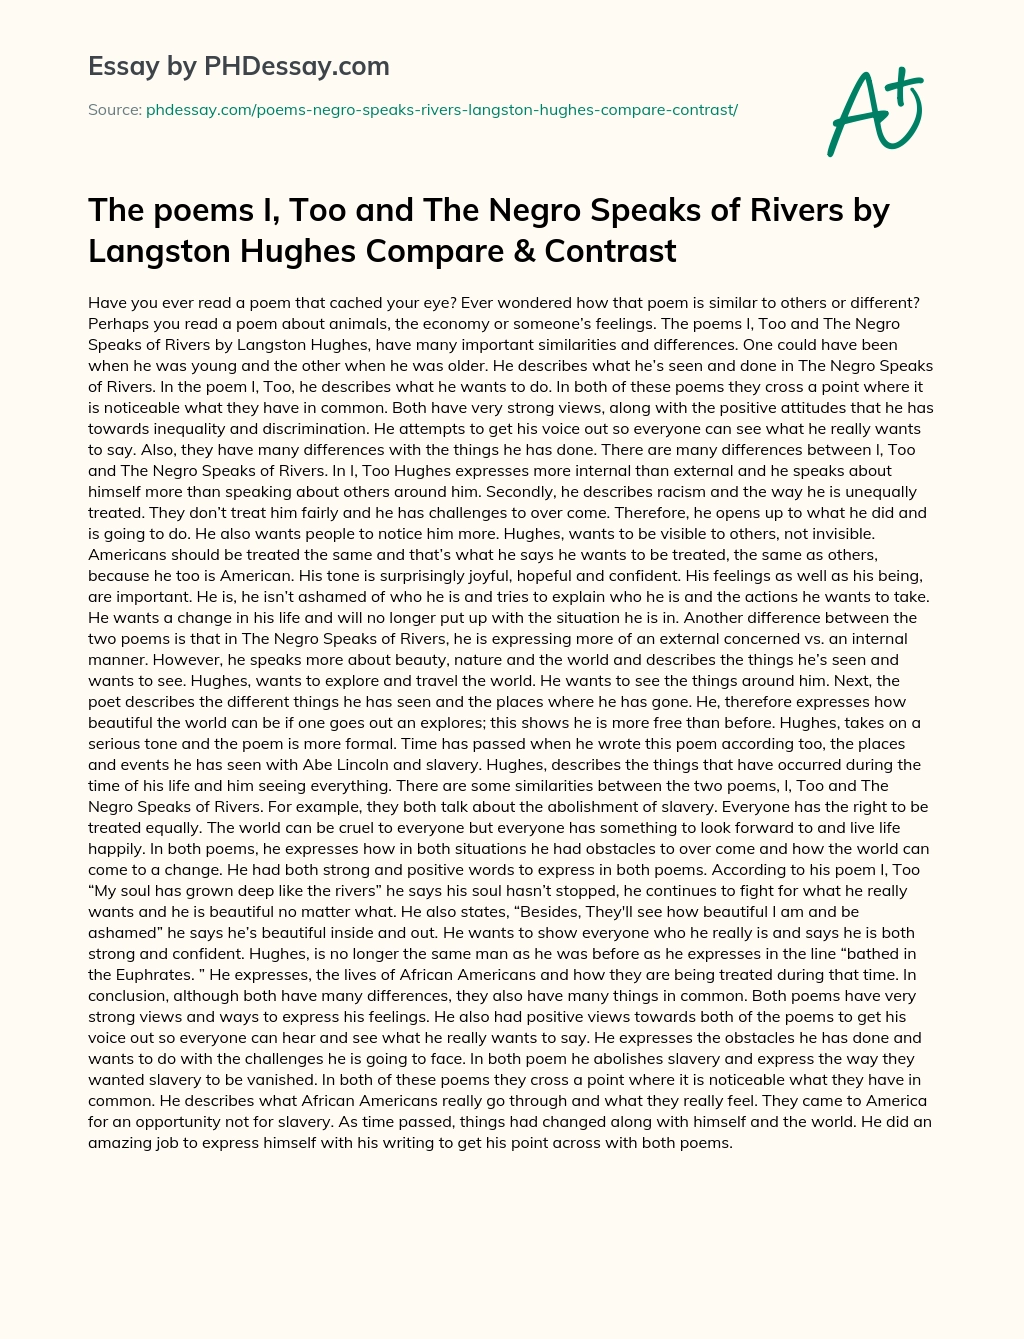 the negro speaks of rivers meaning